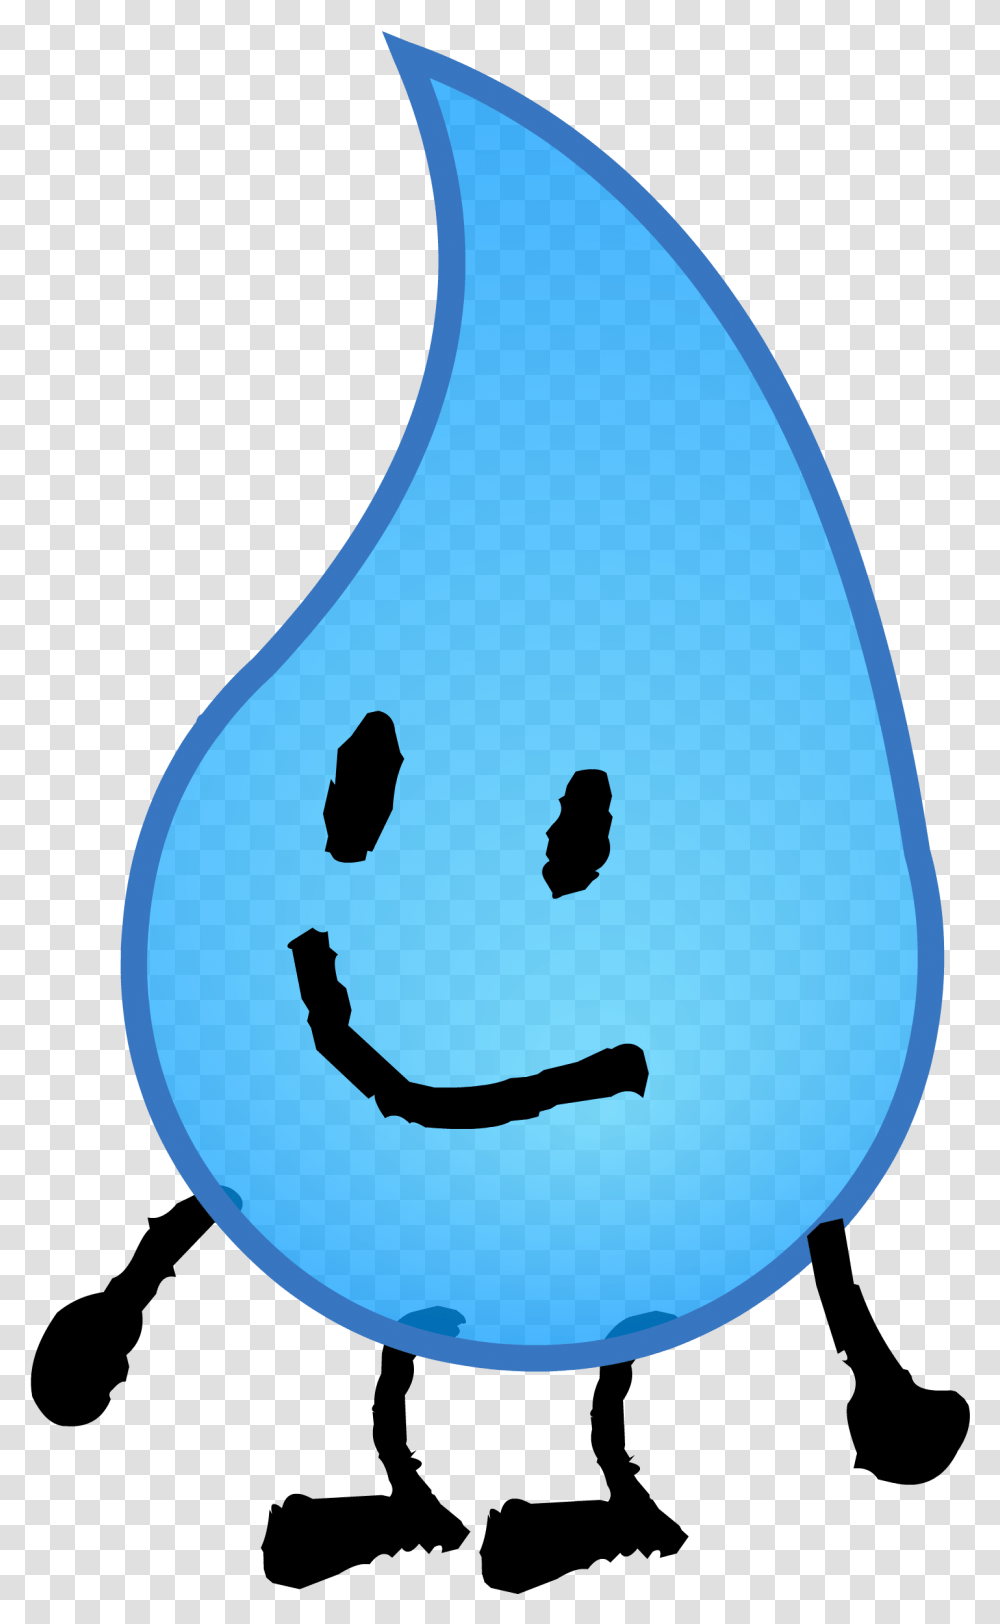 Teardrop Intro Bfb Teardrop, Balloon, Outdoors, Droplet, Person Transparent Png